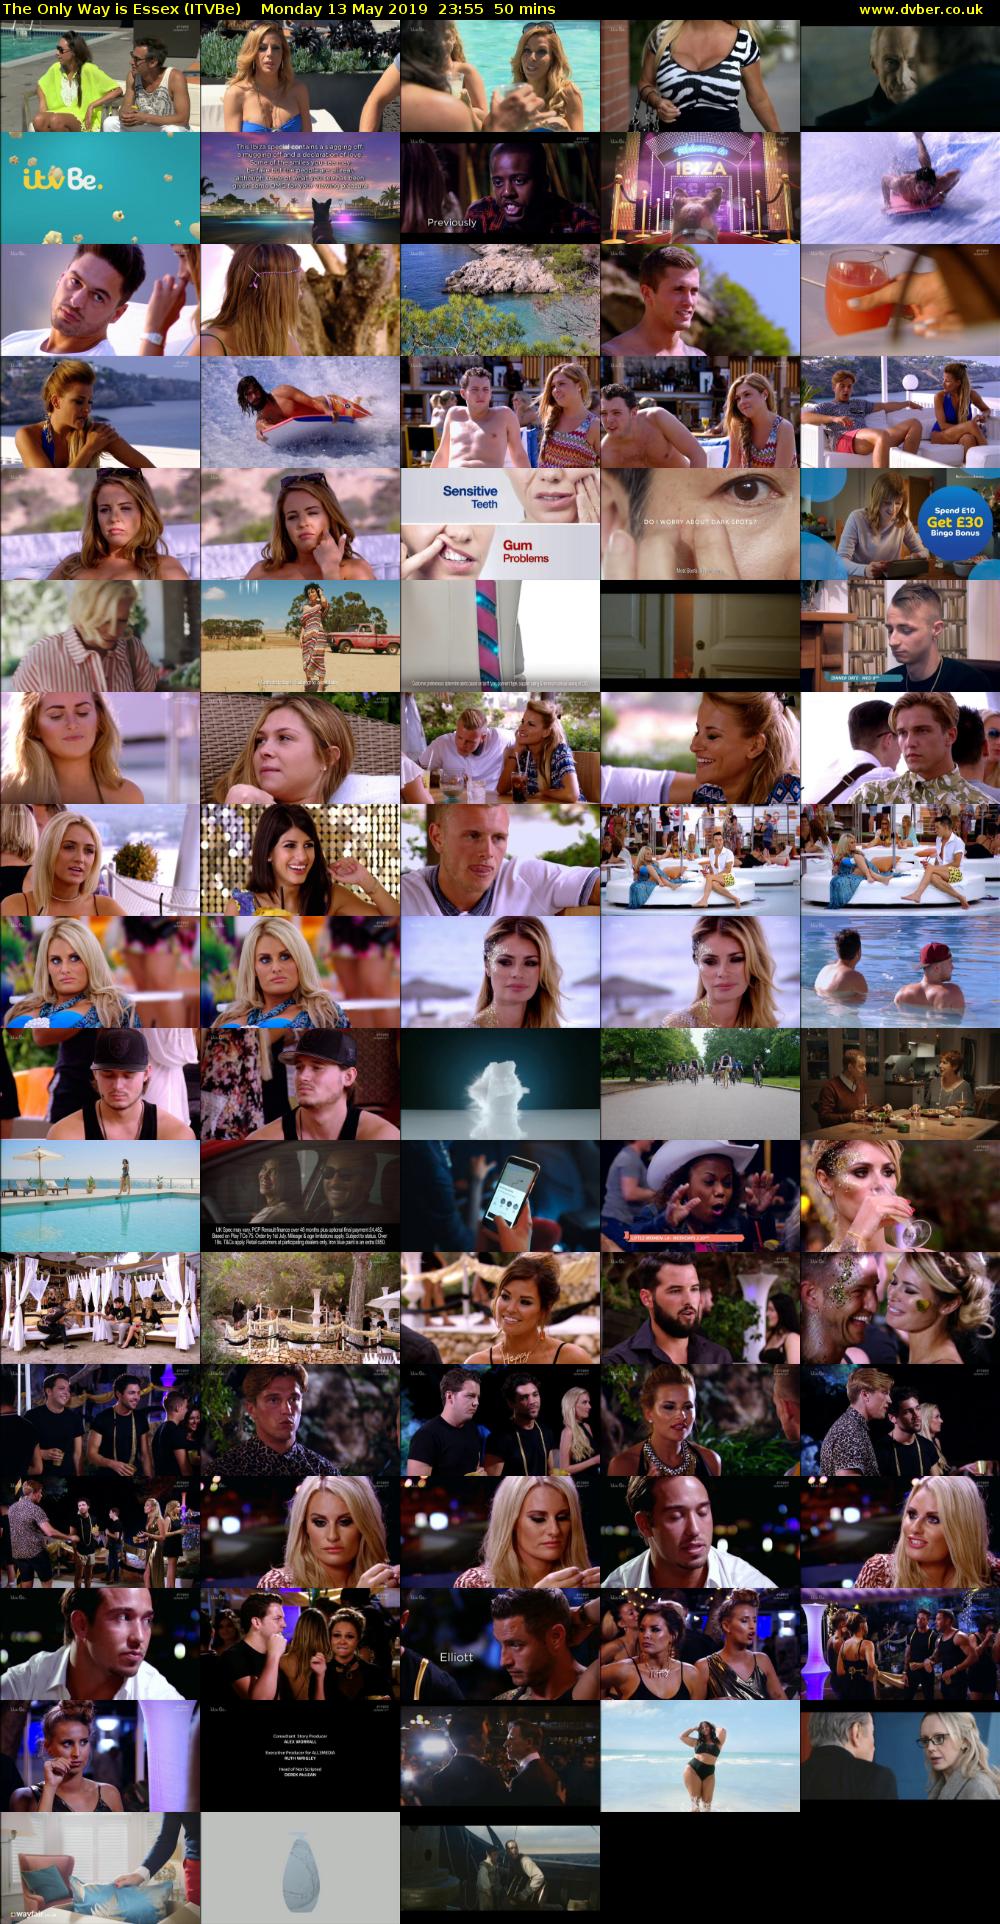 The Only Way is Essex (ITVBe) Monday 13 May 2019 23:55 - 00:45